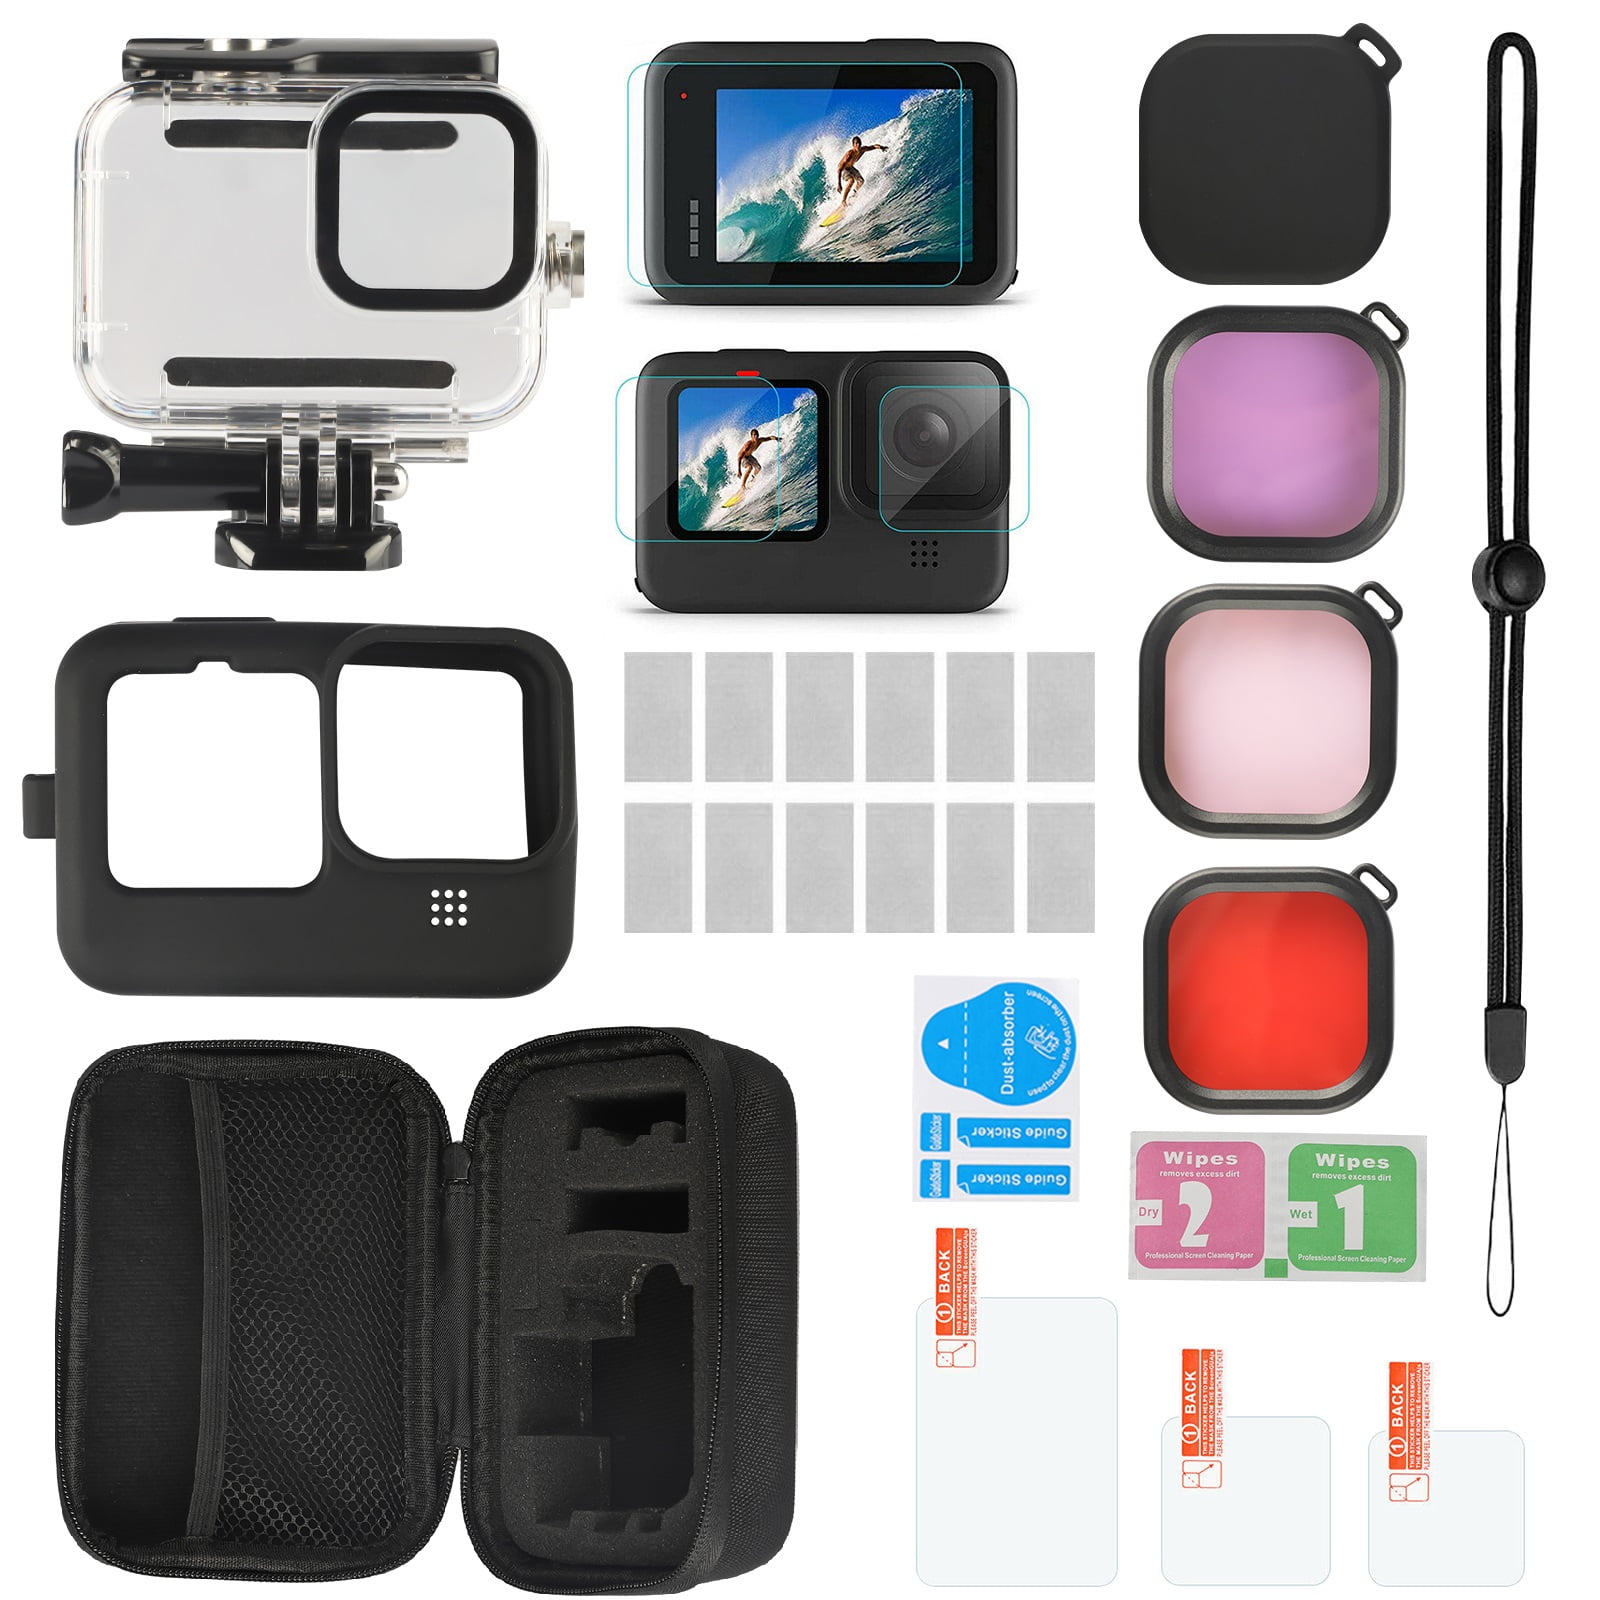 Storage Bag Waterproof Housing Case Diving Filter Kit 6 IN 1 Accessory Kit for GoPro Hero 9 Black Tempered Glass Screen Protector Anti-Fog Inserts for GoPro Hero 9 Black Silicone Frame Case 